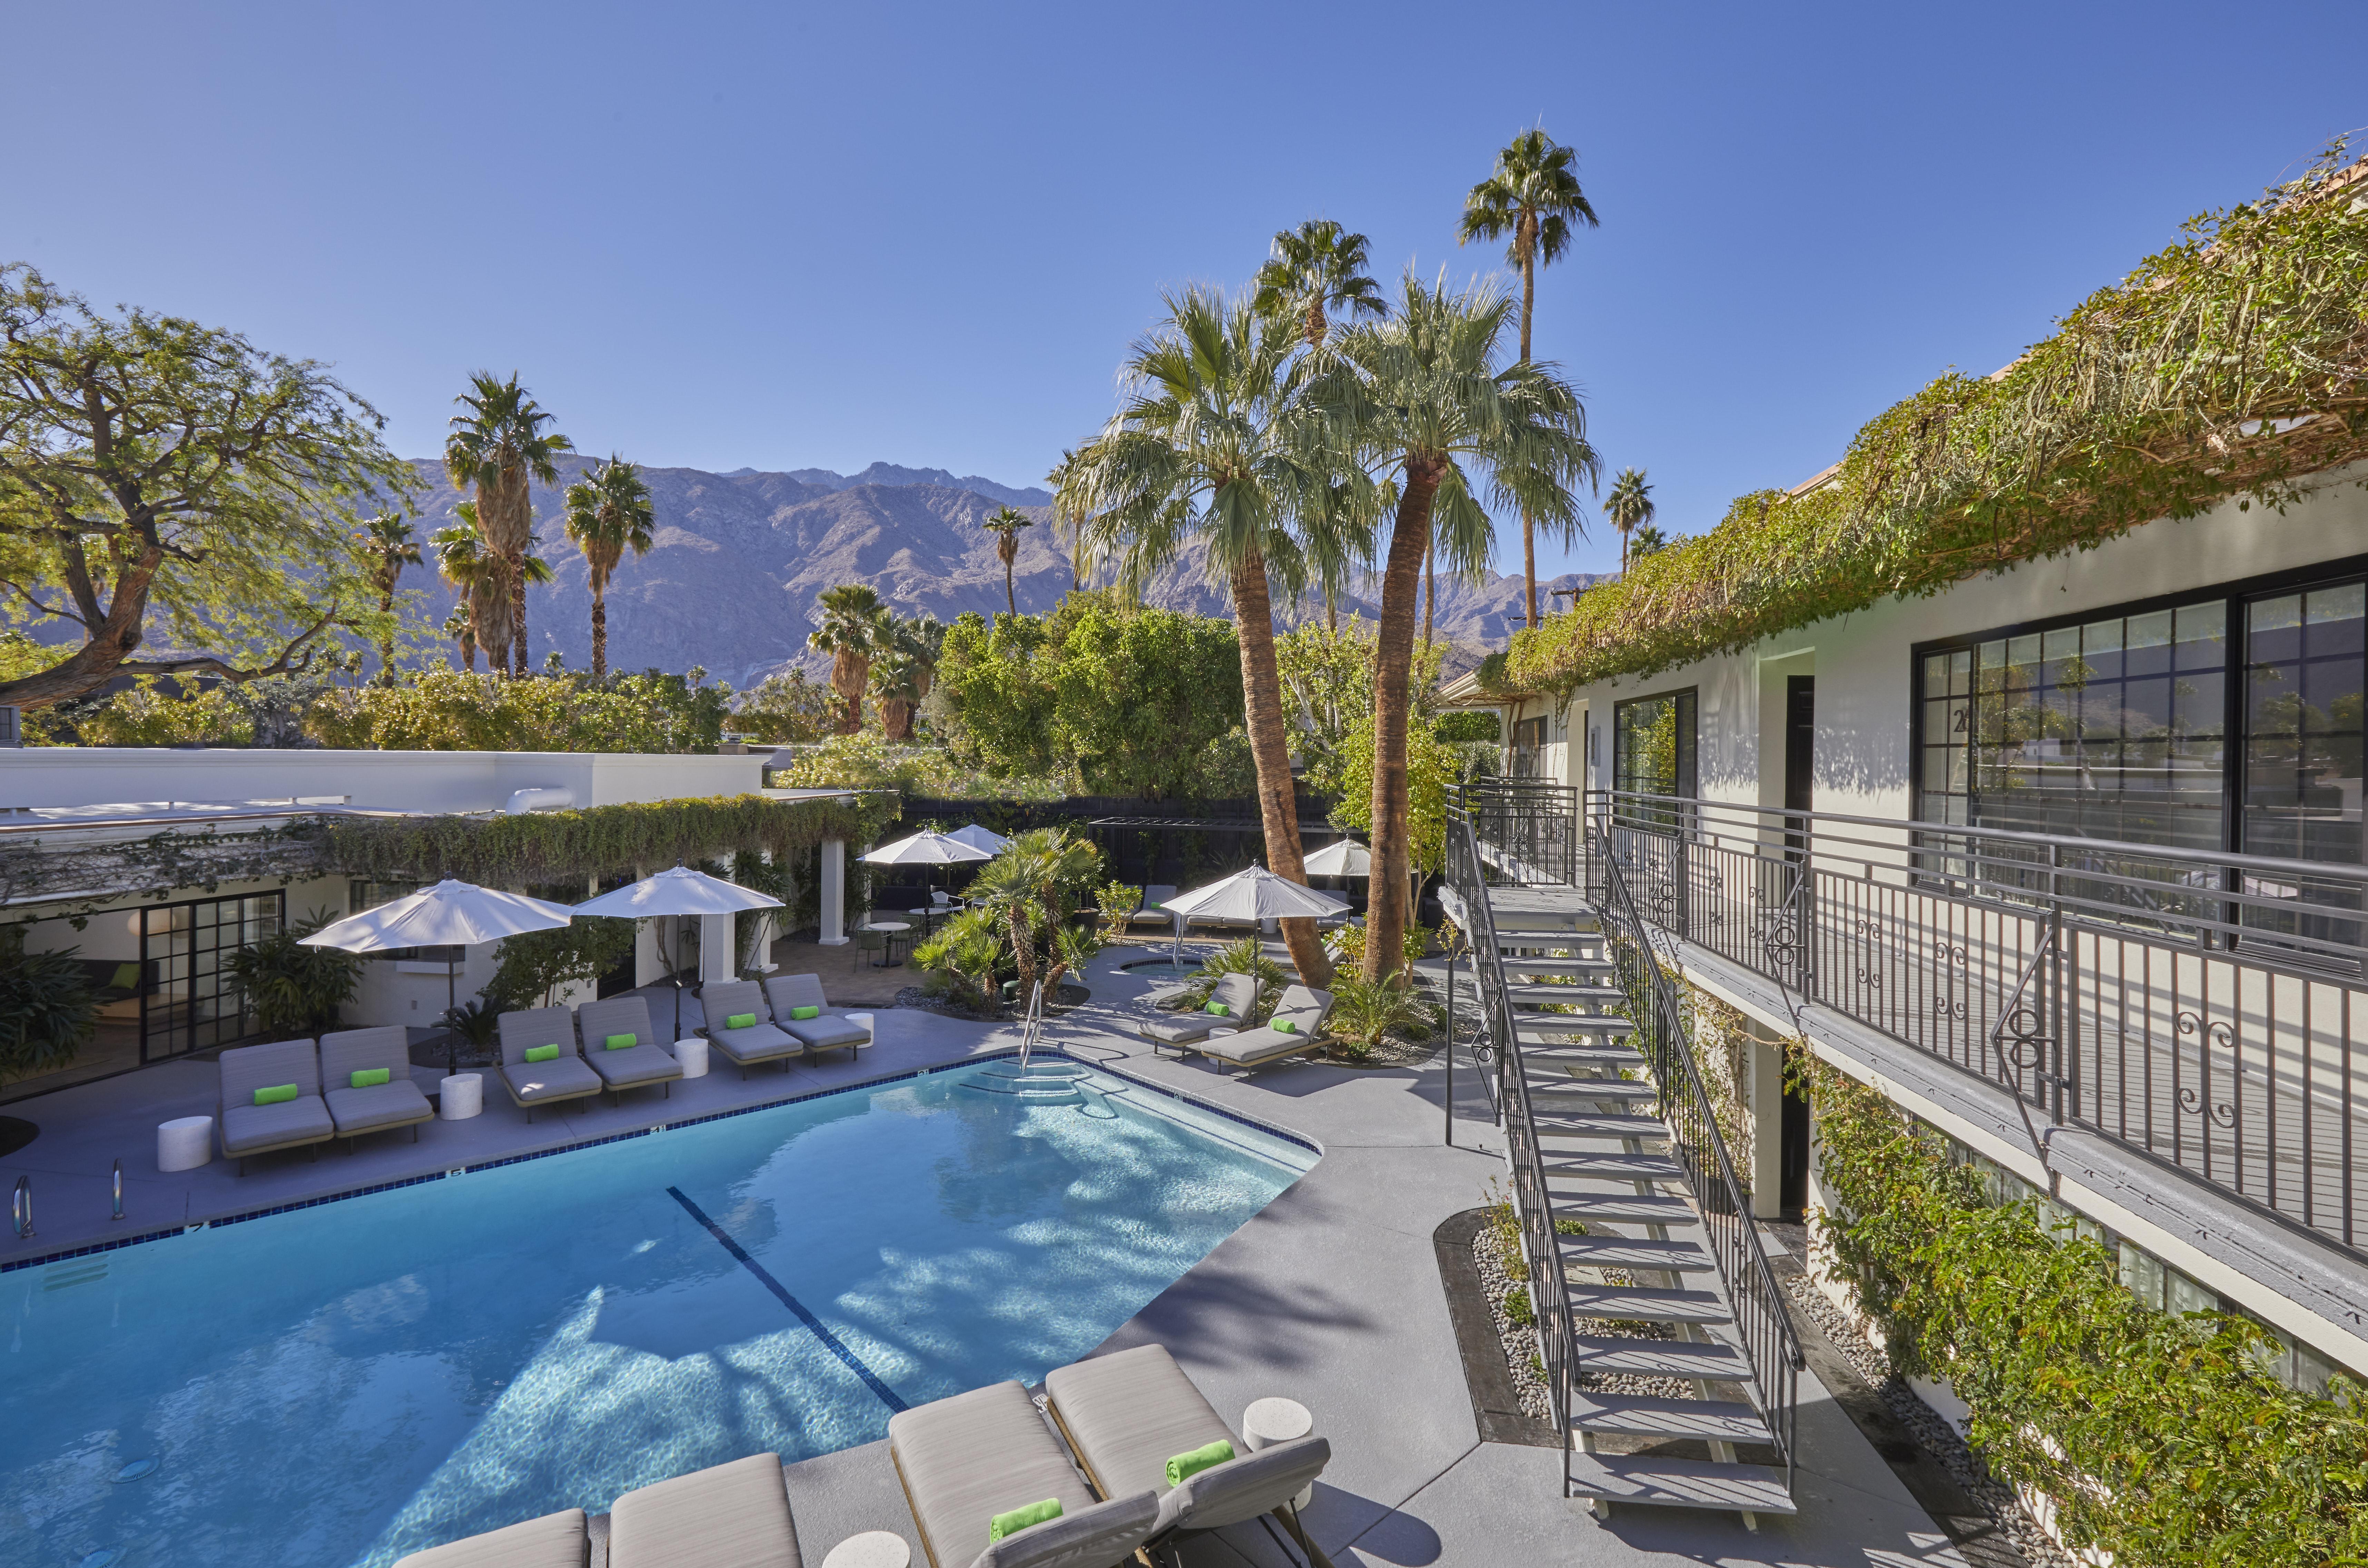 HOTEL DESCANSO RESORT (ADULTS ONLY) PALM SPRINGS, CA 3* (United States) -  from US$ 204 | BOOKED